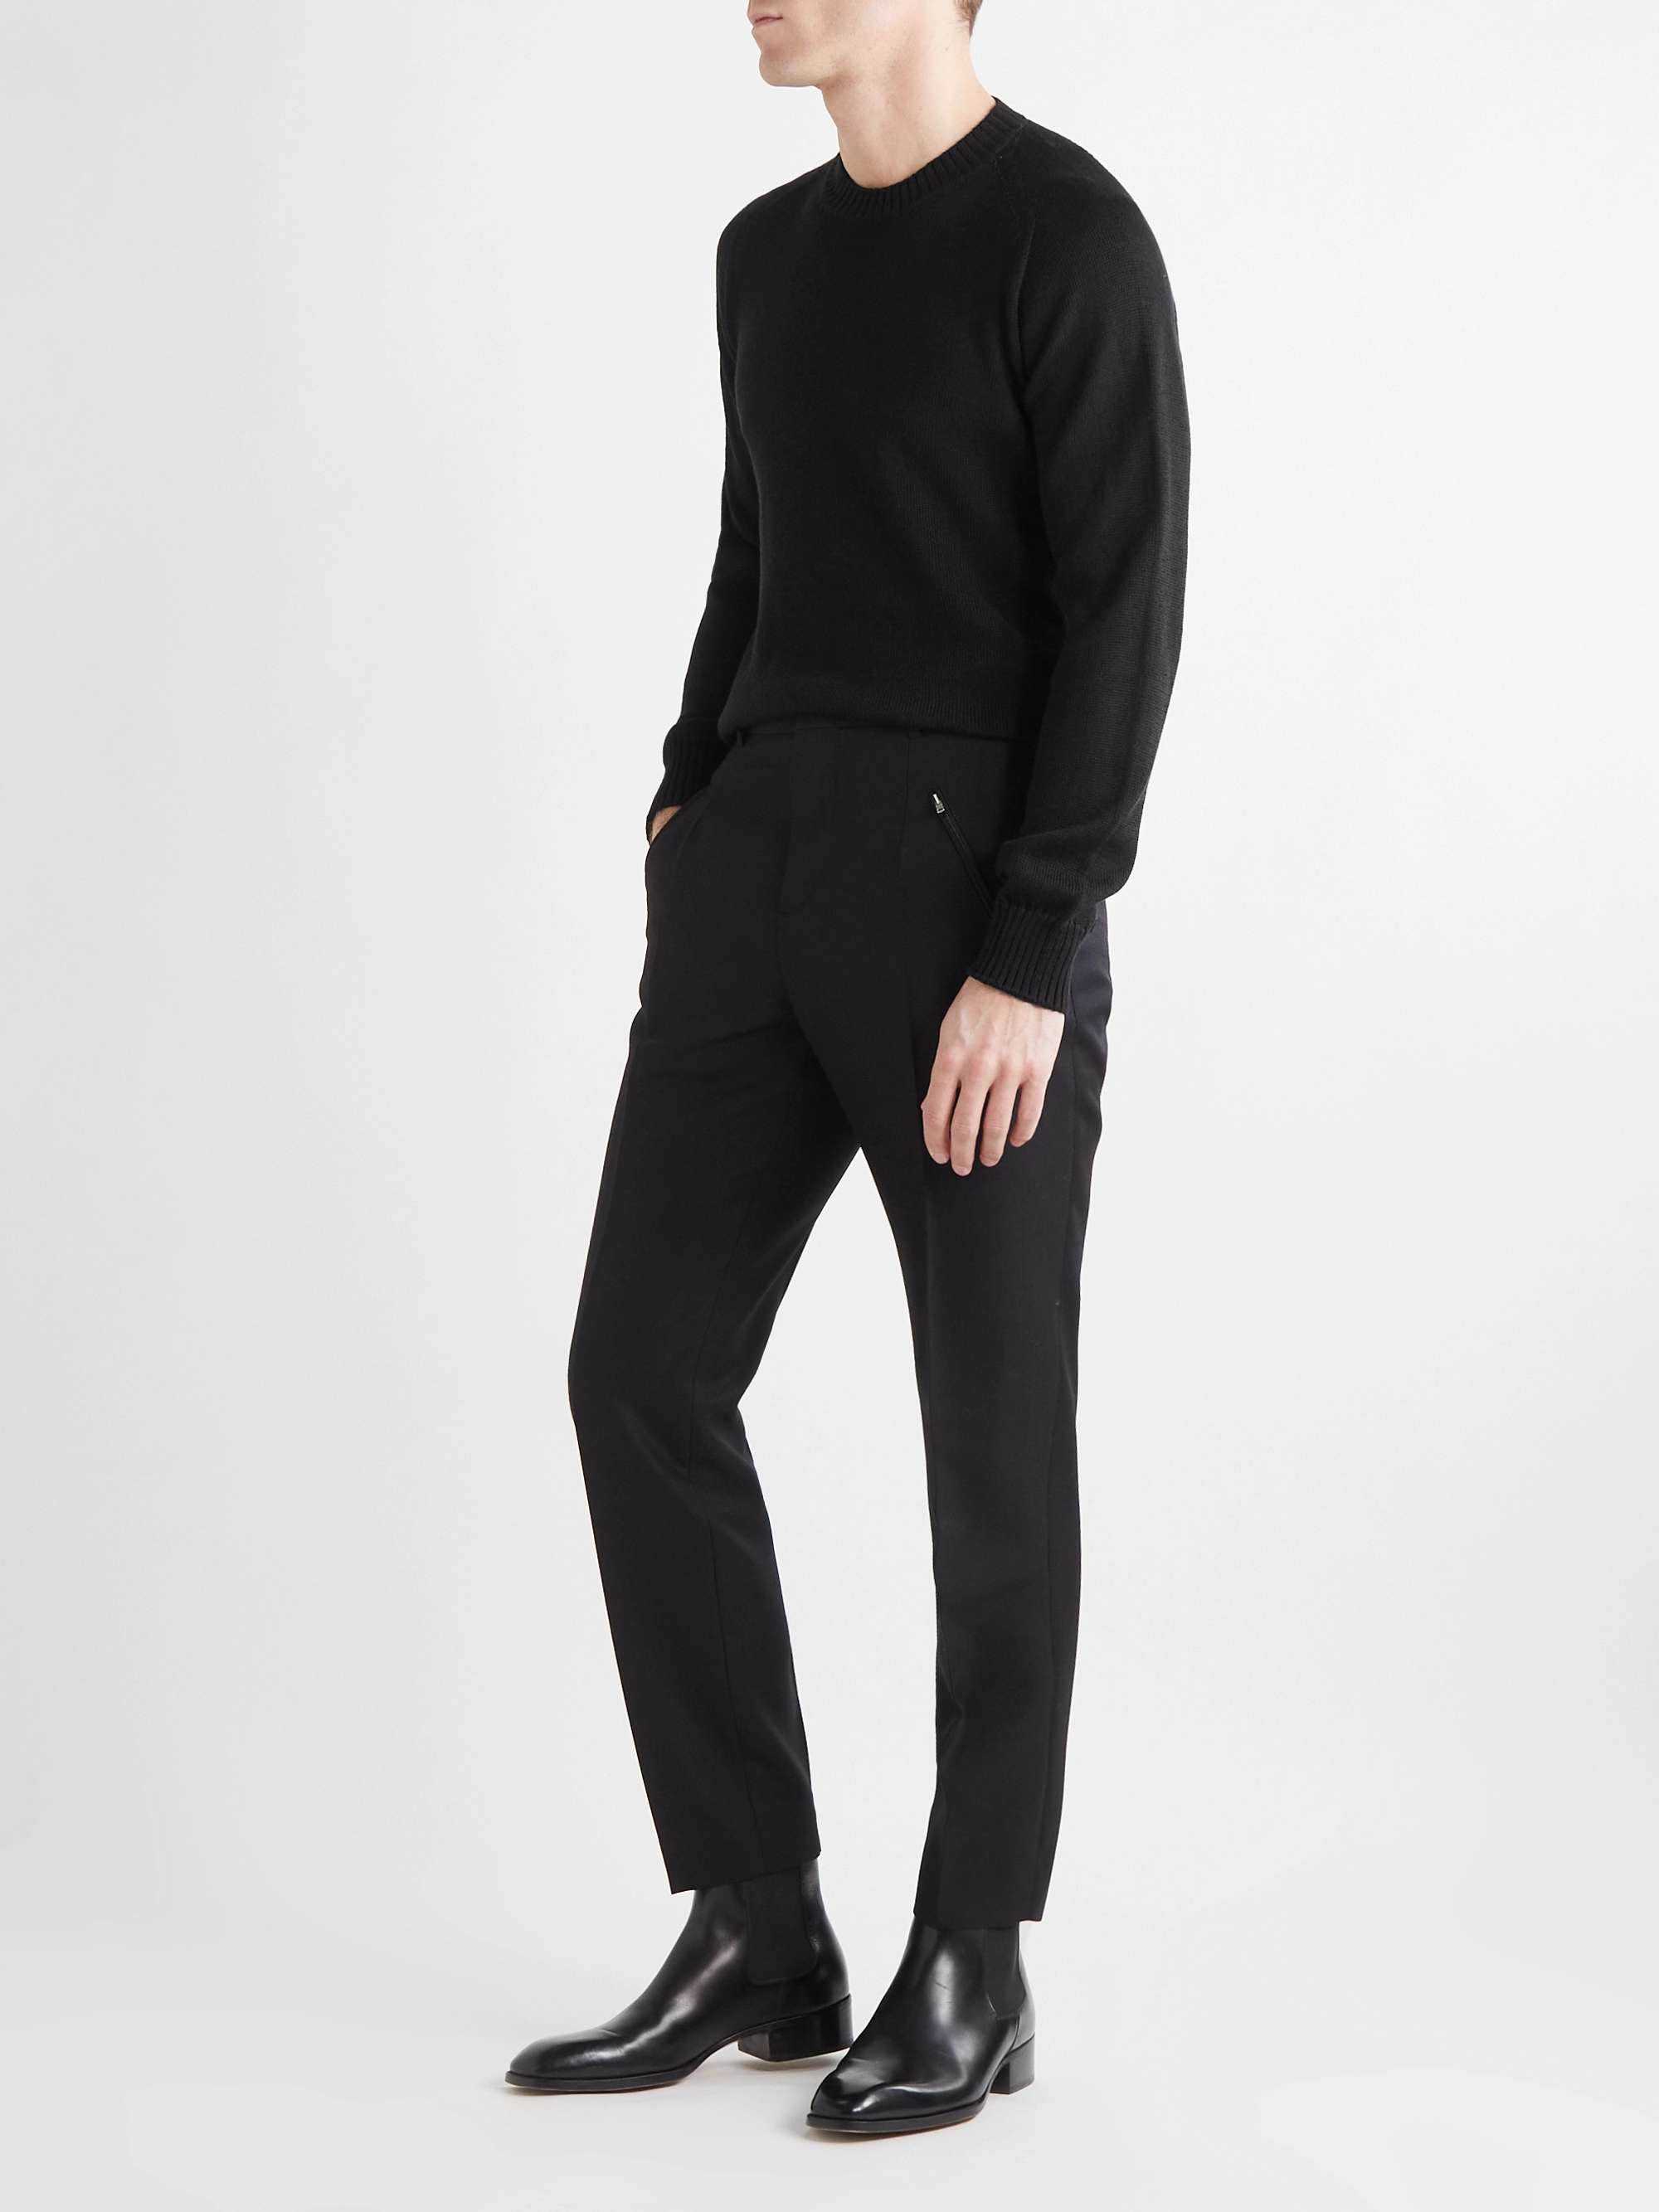 TOM FORD Cotton and Silk-Blend Sweater